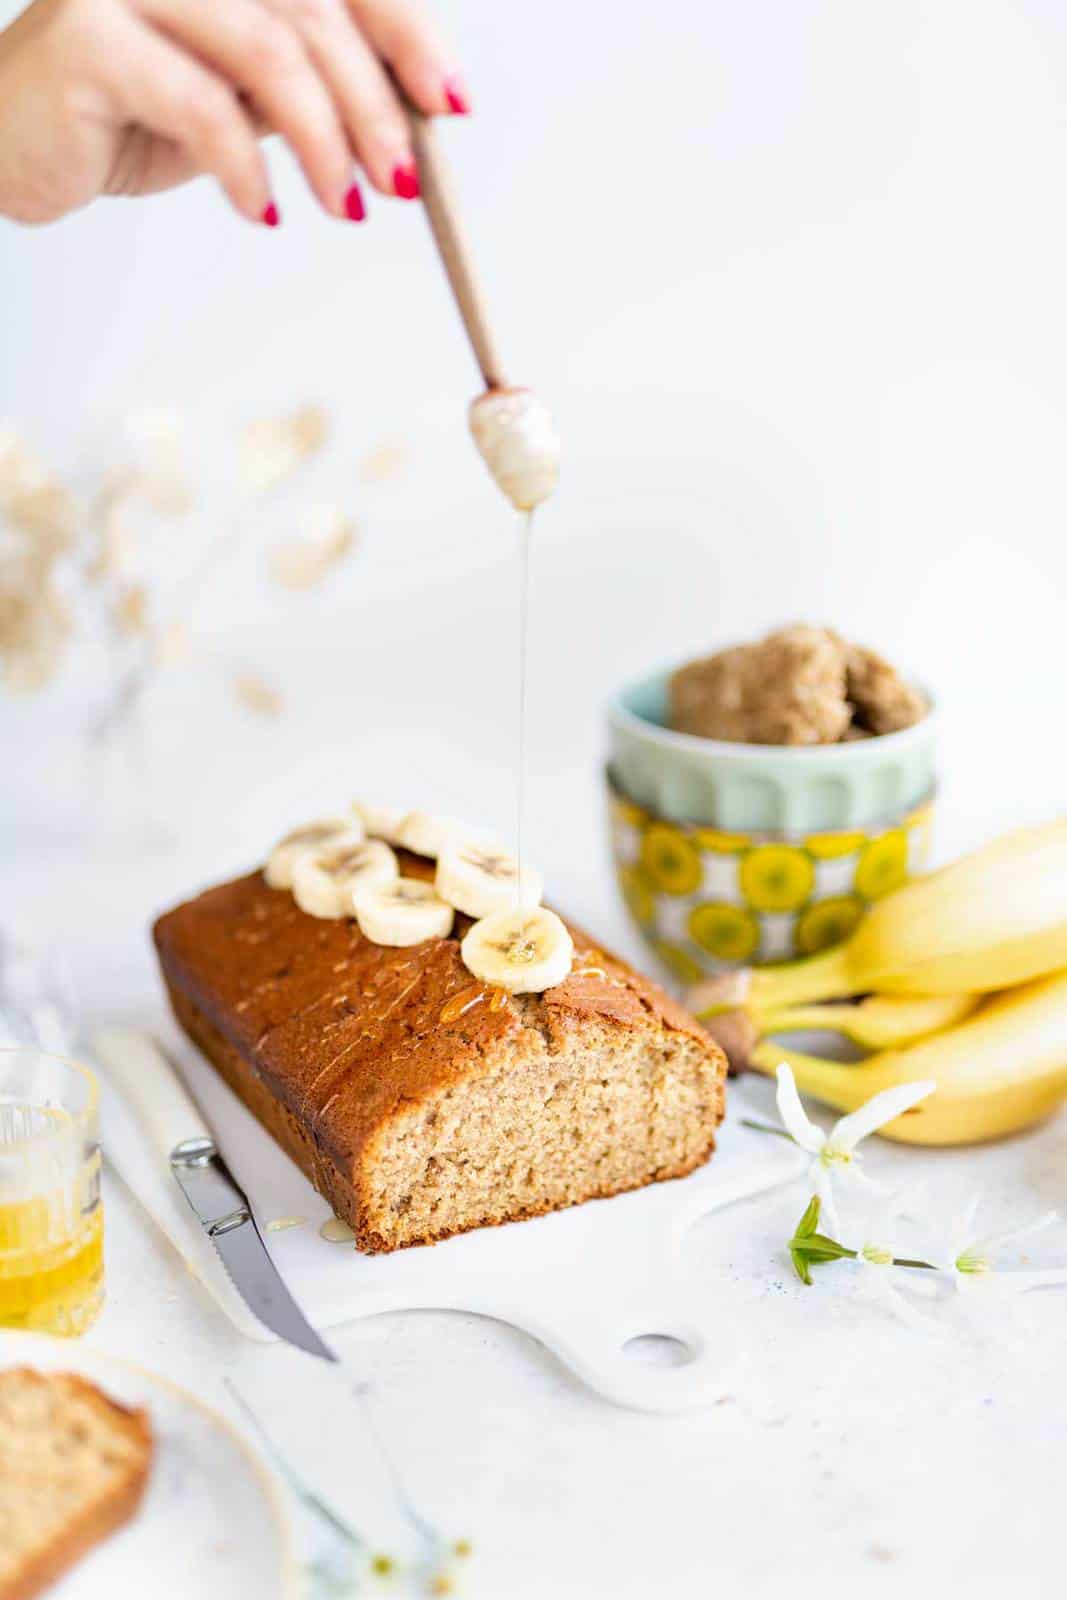 Drizzling banana loaf with honey